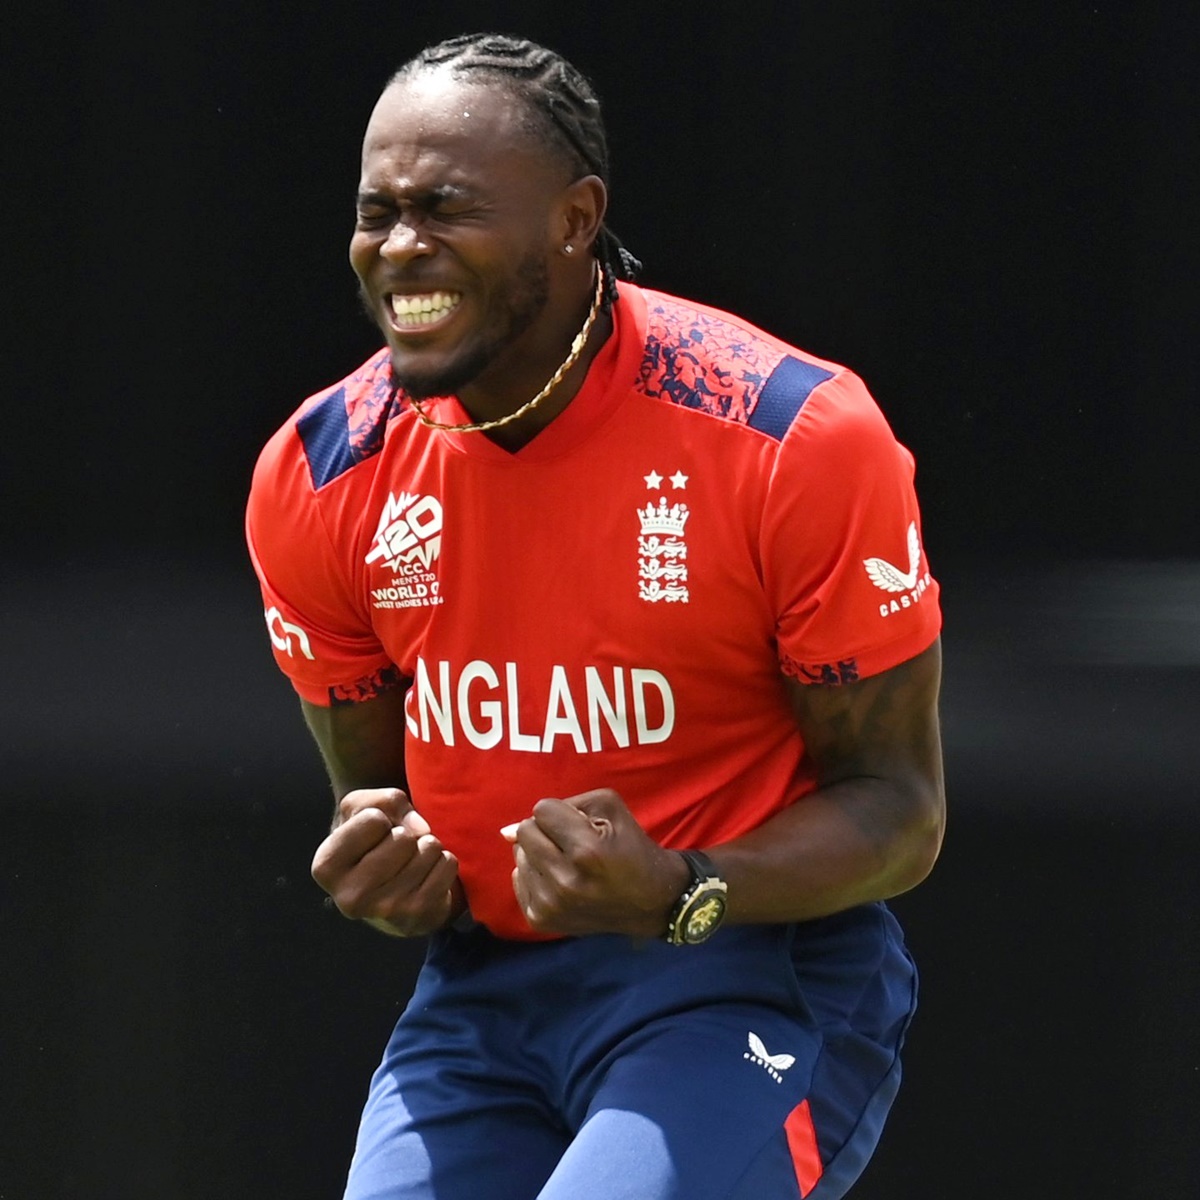 Jofra Archer is ecstatic after having Travis Head clean bowled.